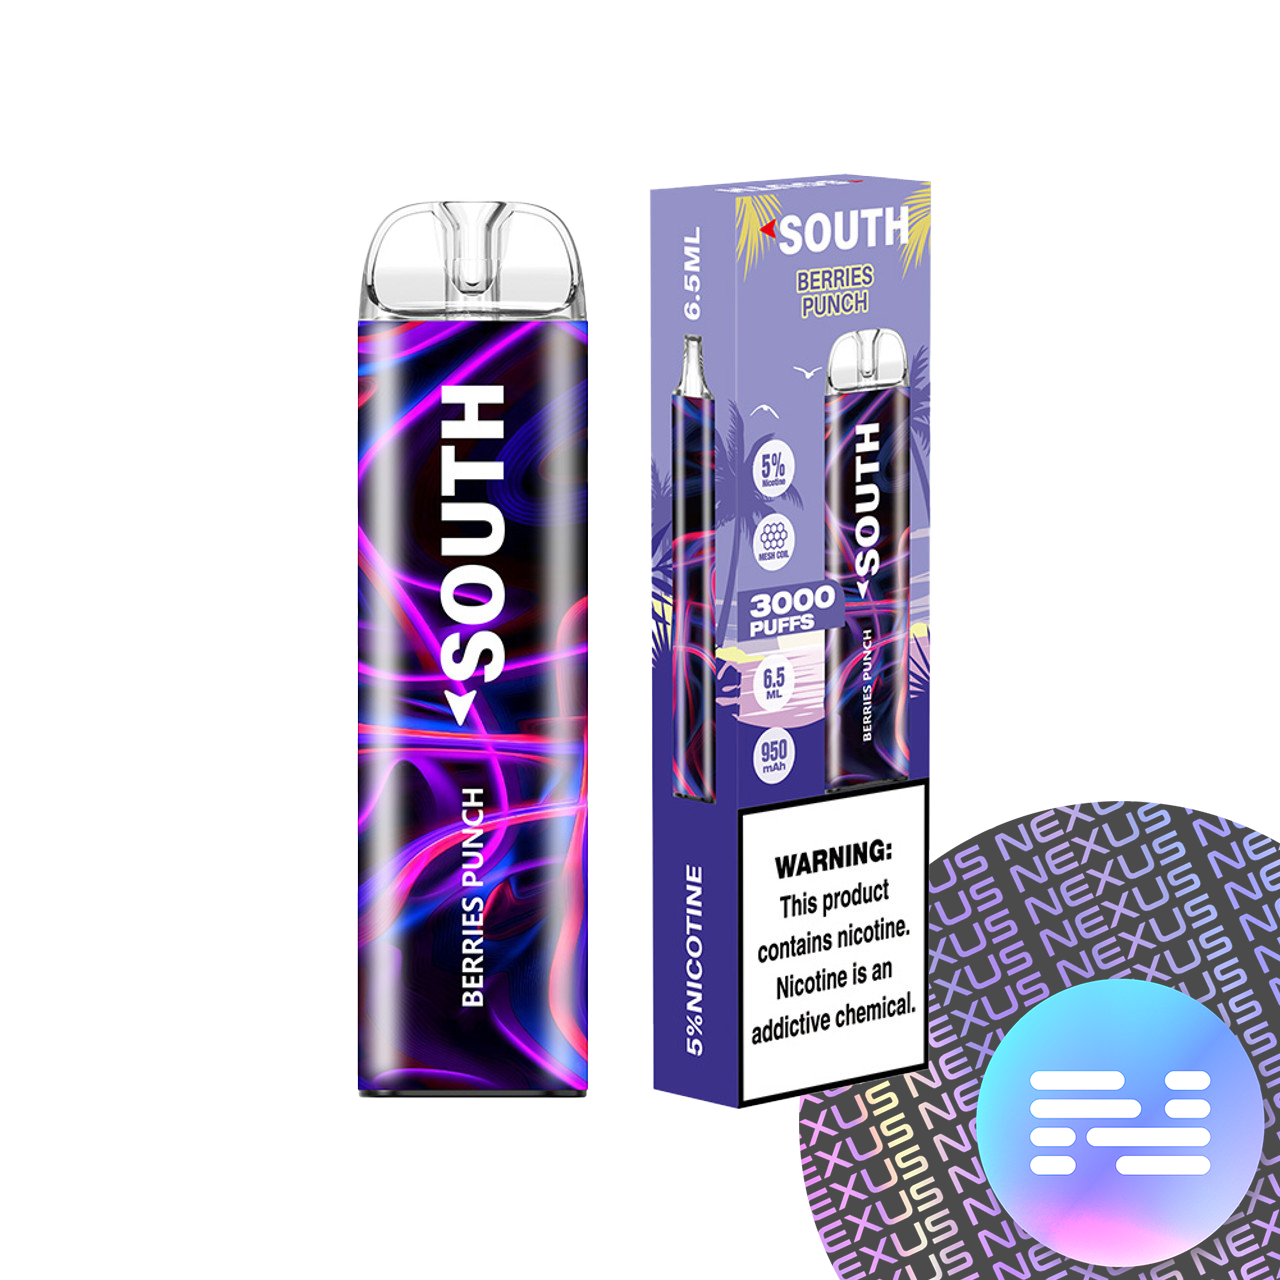 Berries Punch South 3000 Disposable Vape